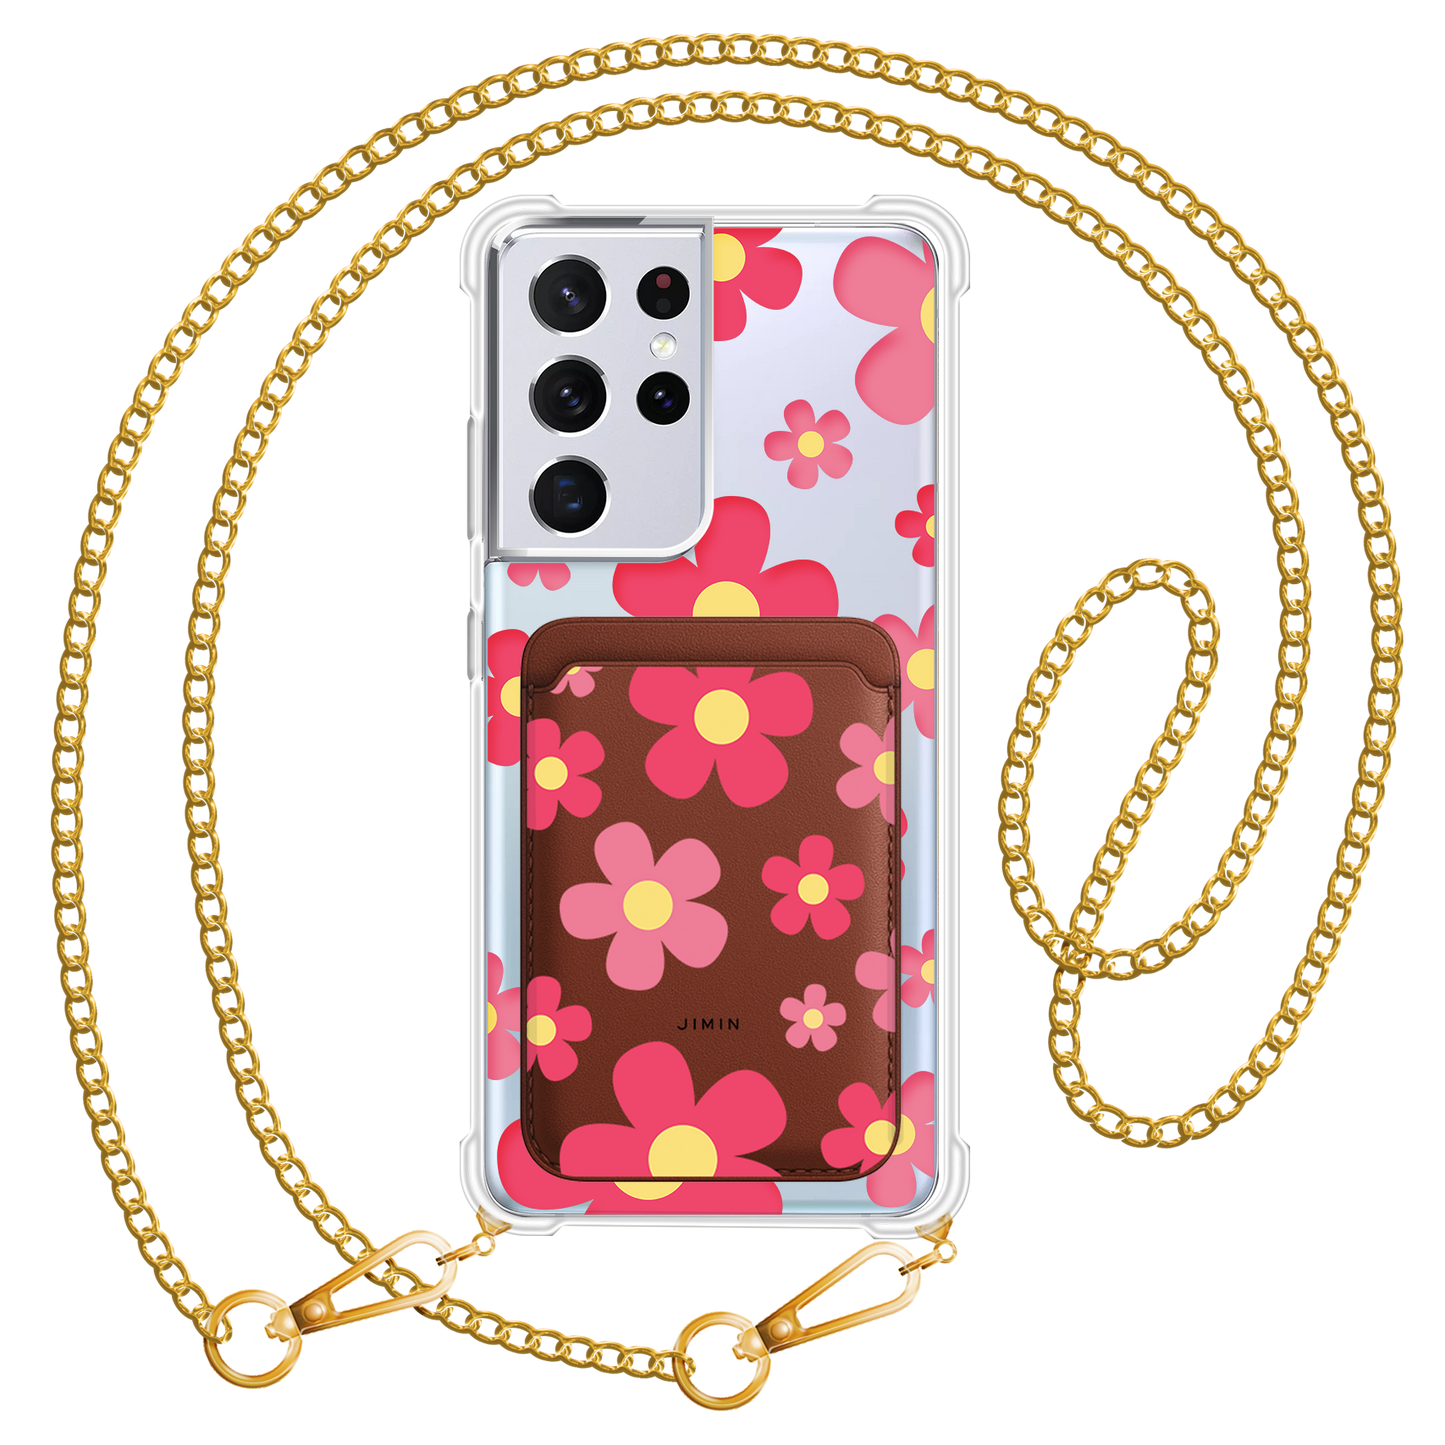 Android Magnetic Wallet Case - Daisy Blush